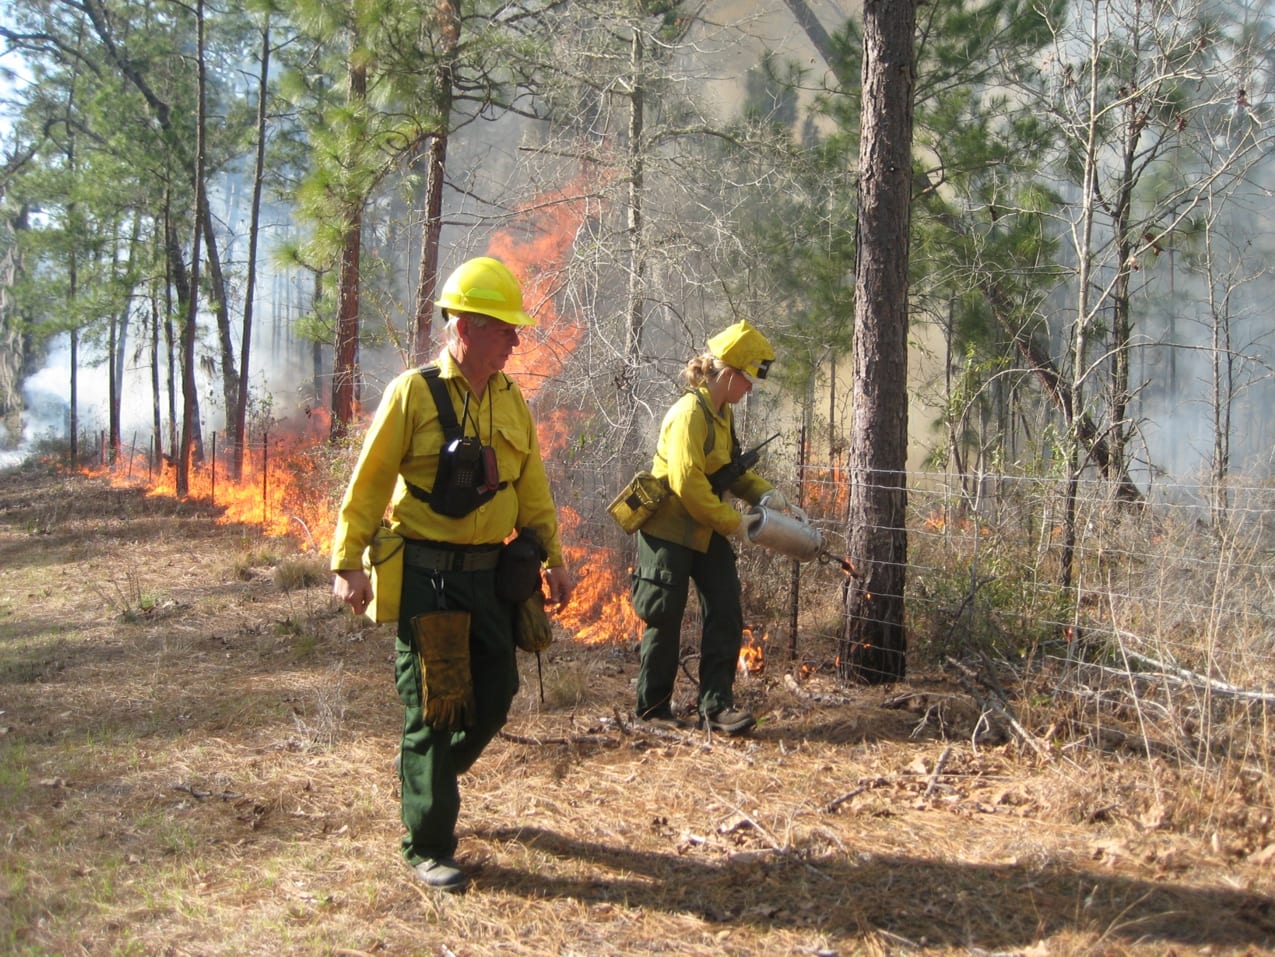 Firefighters conducting a controlled burn.